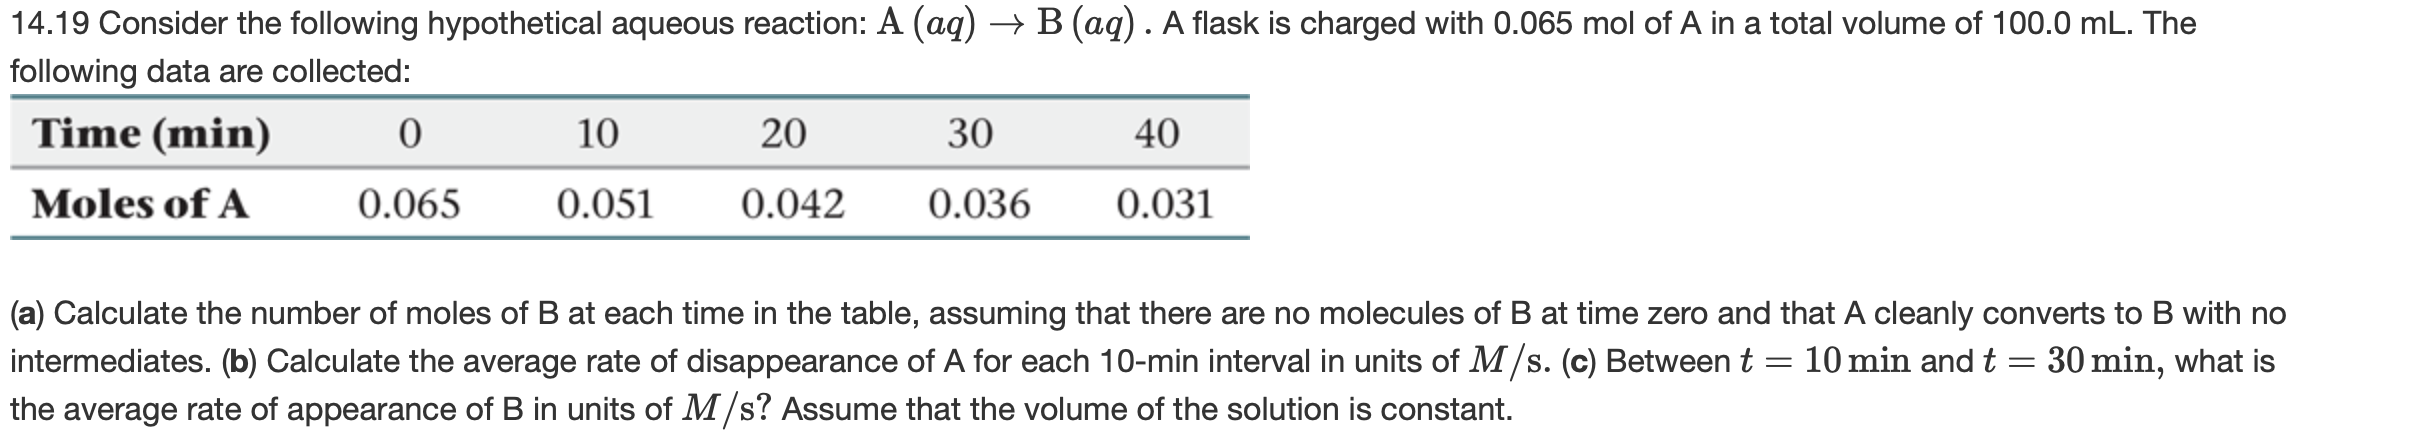 → B (aq). A flask is charged with 0.065 mol of A in a total volume of 100.0 mL. The
14.19 Consider the following hypothetical aqueous reaction: A (aq)
following data are collected:
Time (min)
10
20
30
40
0.031
Moles of A
0.065
0.051
0.042
0.036
(a) Calculate the number of moles of B at each time in the table, assuming that there are no molecules of B at time zero and that A cleanly converts to B with no
intermediates. (b) Calculate the average rate of disappearance of A for each 10-min interval in units of M/s. (c) Between t
the average rate of appearance of B in units of M/s? Assume that the volume of the solution is constant.
10 min and t = 30 min, what is
